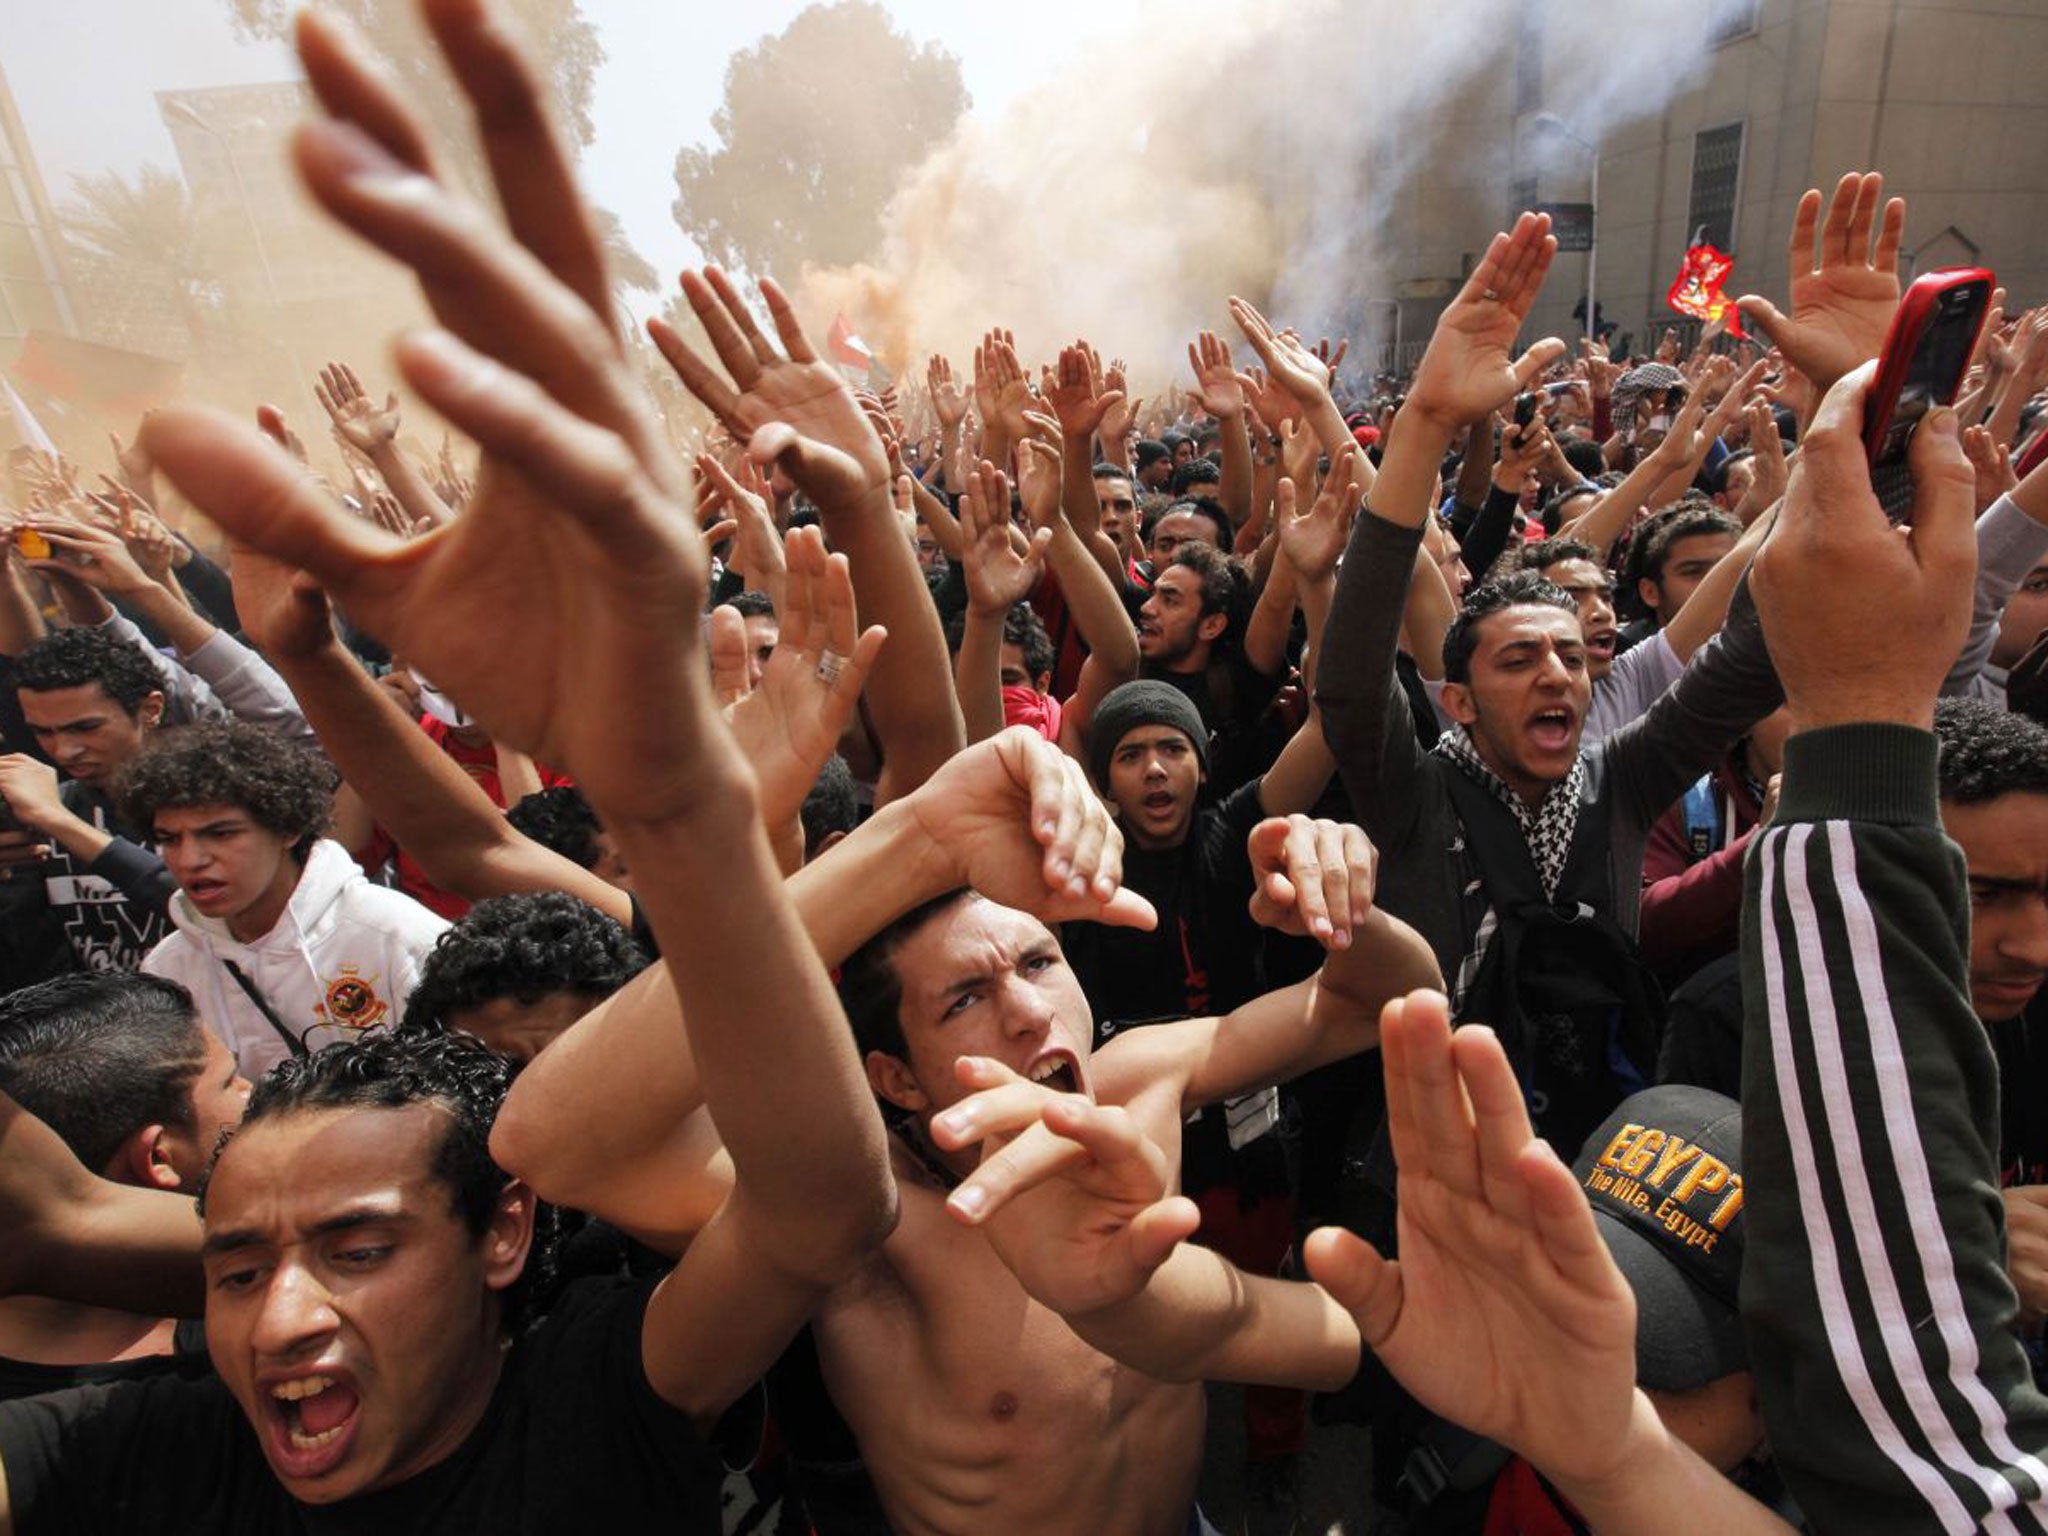 Fans of Al-Ahly football club celebrate in Cairo after an Egyptian court confirmed death sentences against 21 people for their role in a deadly 2012 riot